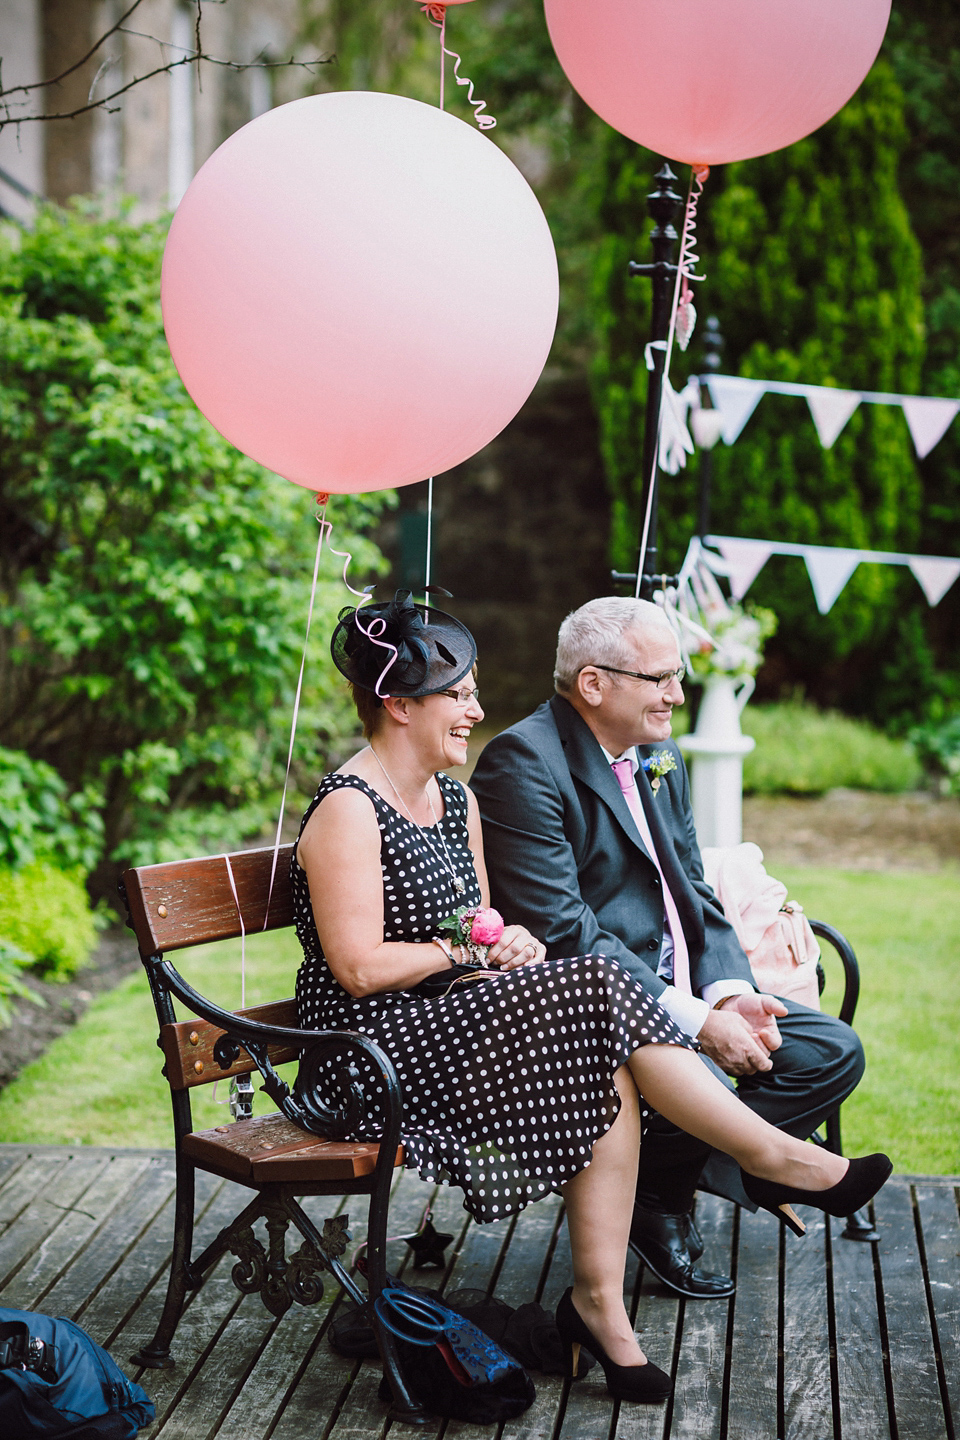 Pompoms, Giant Balloons and a Garden Party for a Delightful Child Friendly Wedding. Photography by Rooftop Mosaic.